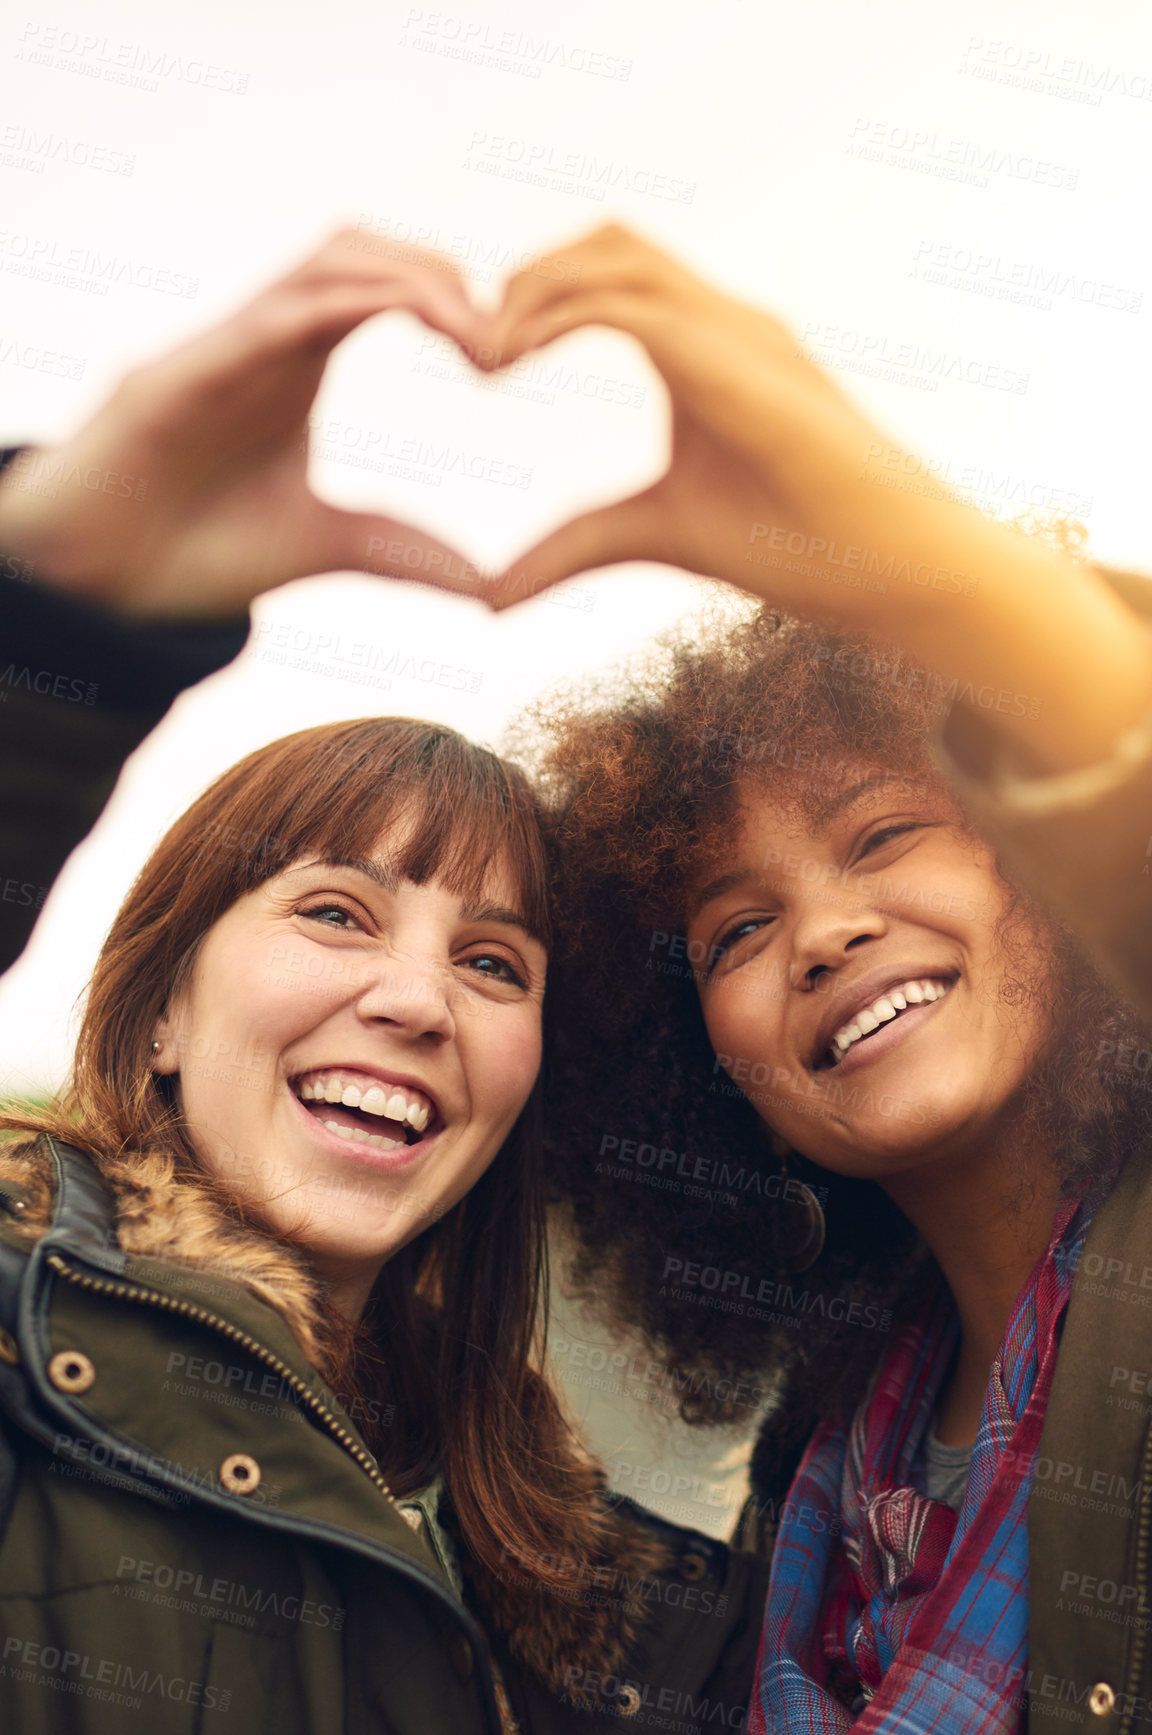 Buy stock photo Shot of two friends making a heart shape with their hands while standing outside